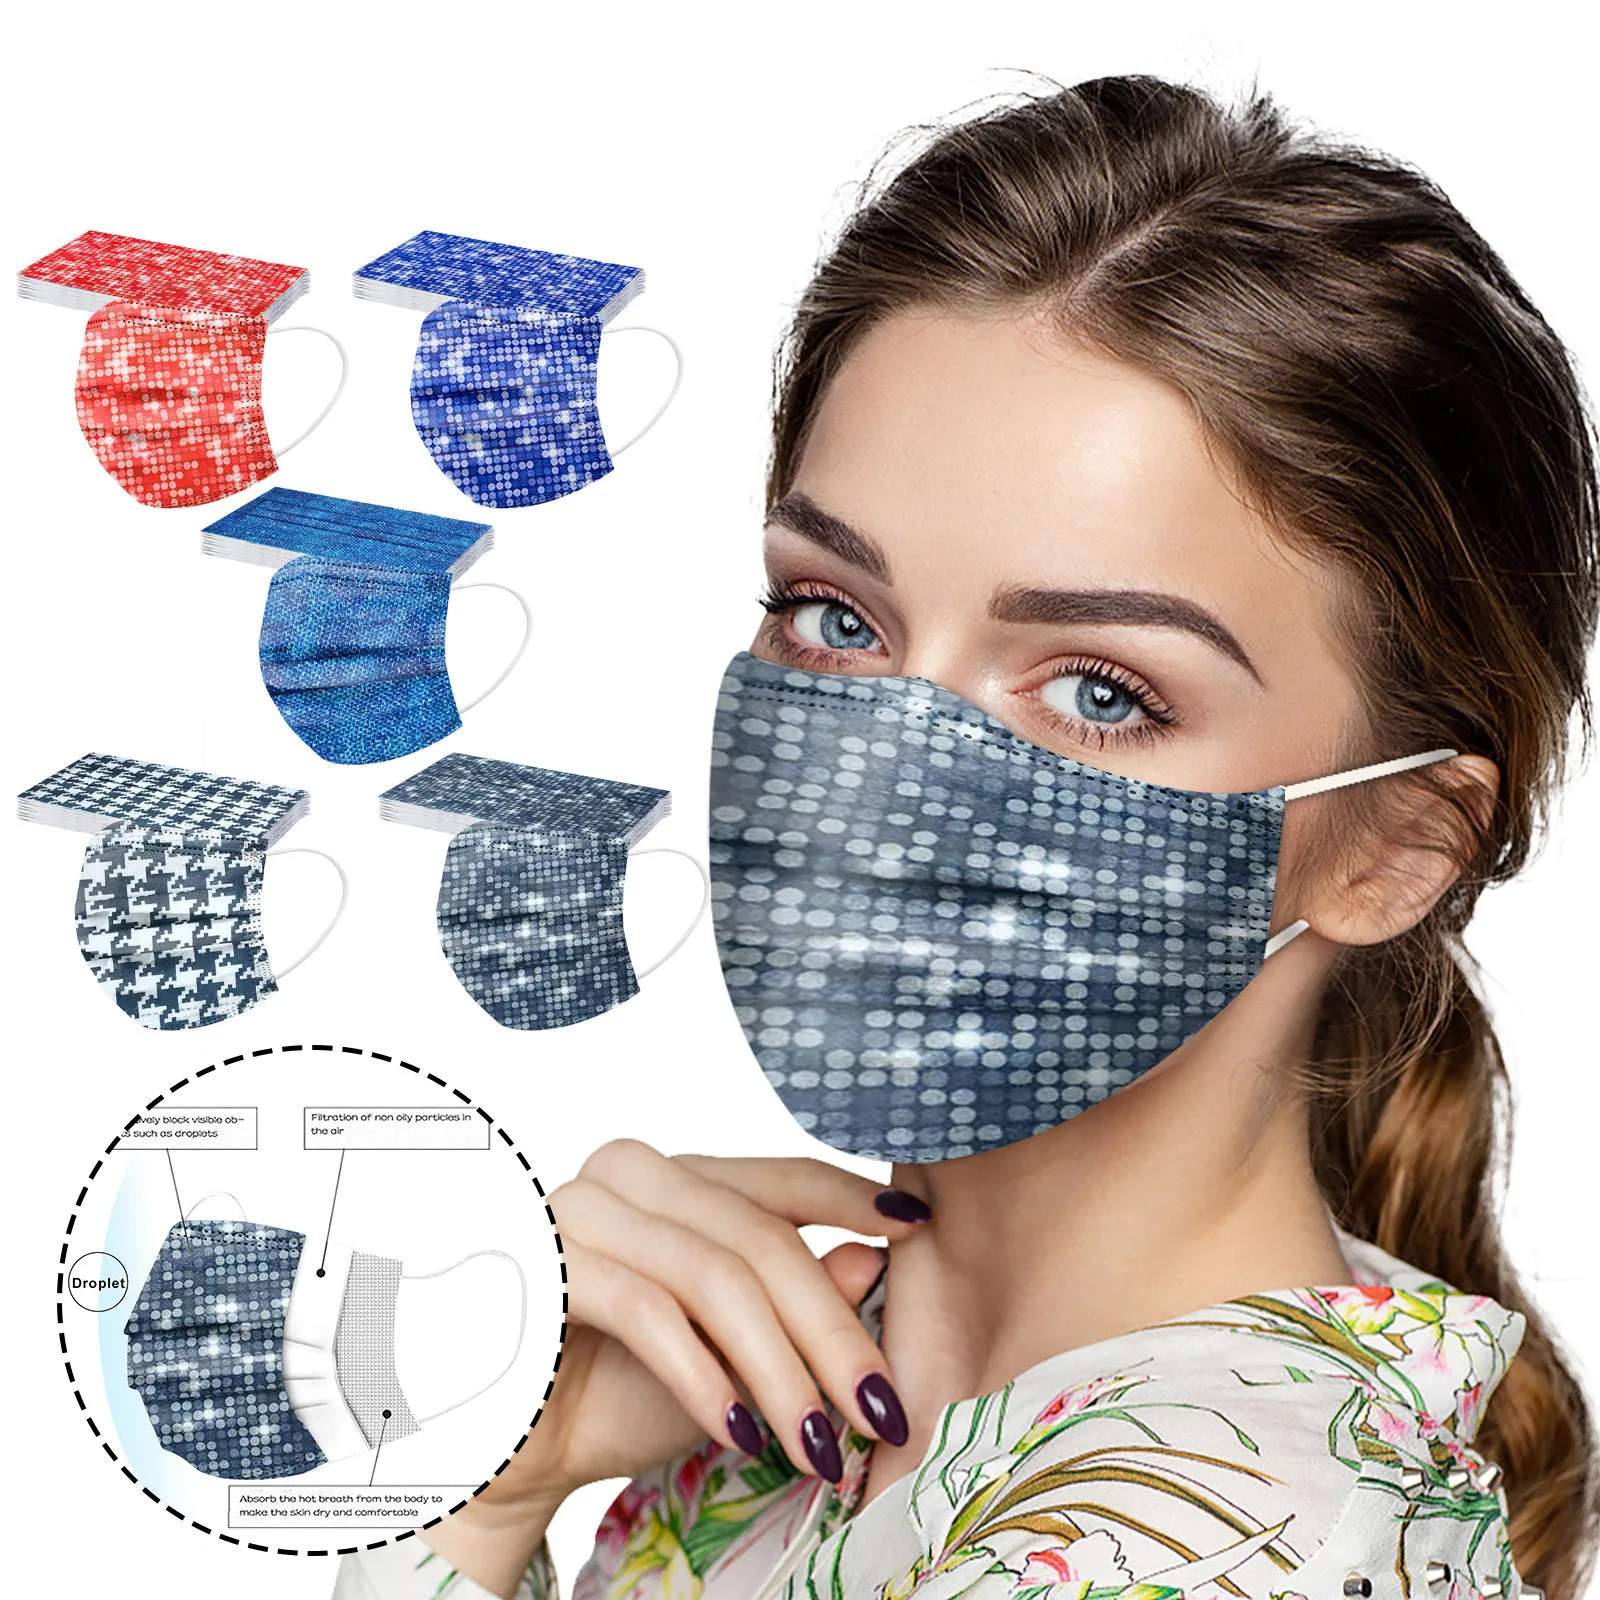 funny adult halloween costumes 10pcs Adult Color Printing Mask Disposable Protective Mask 3ply cubrebocas Breathable Meltblown Masque Halloween Cosplay Mask scary halloween costumes